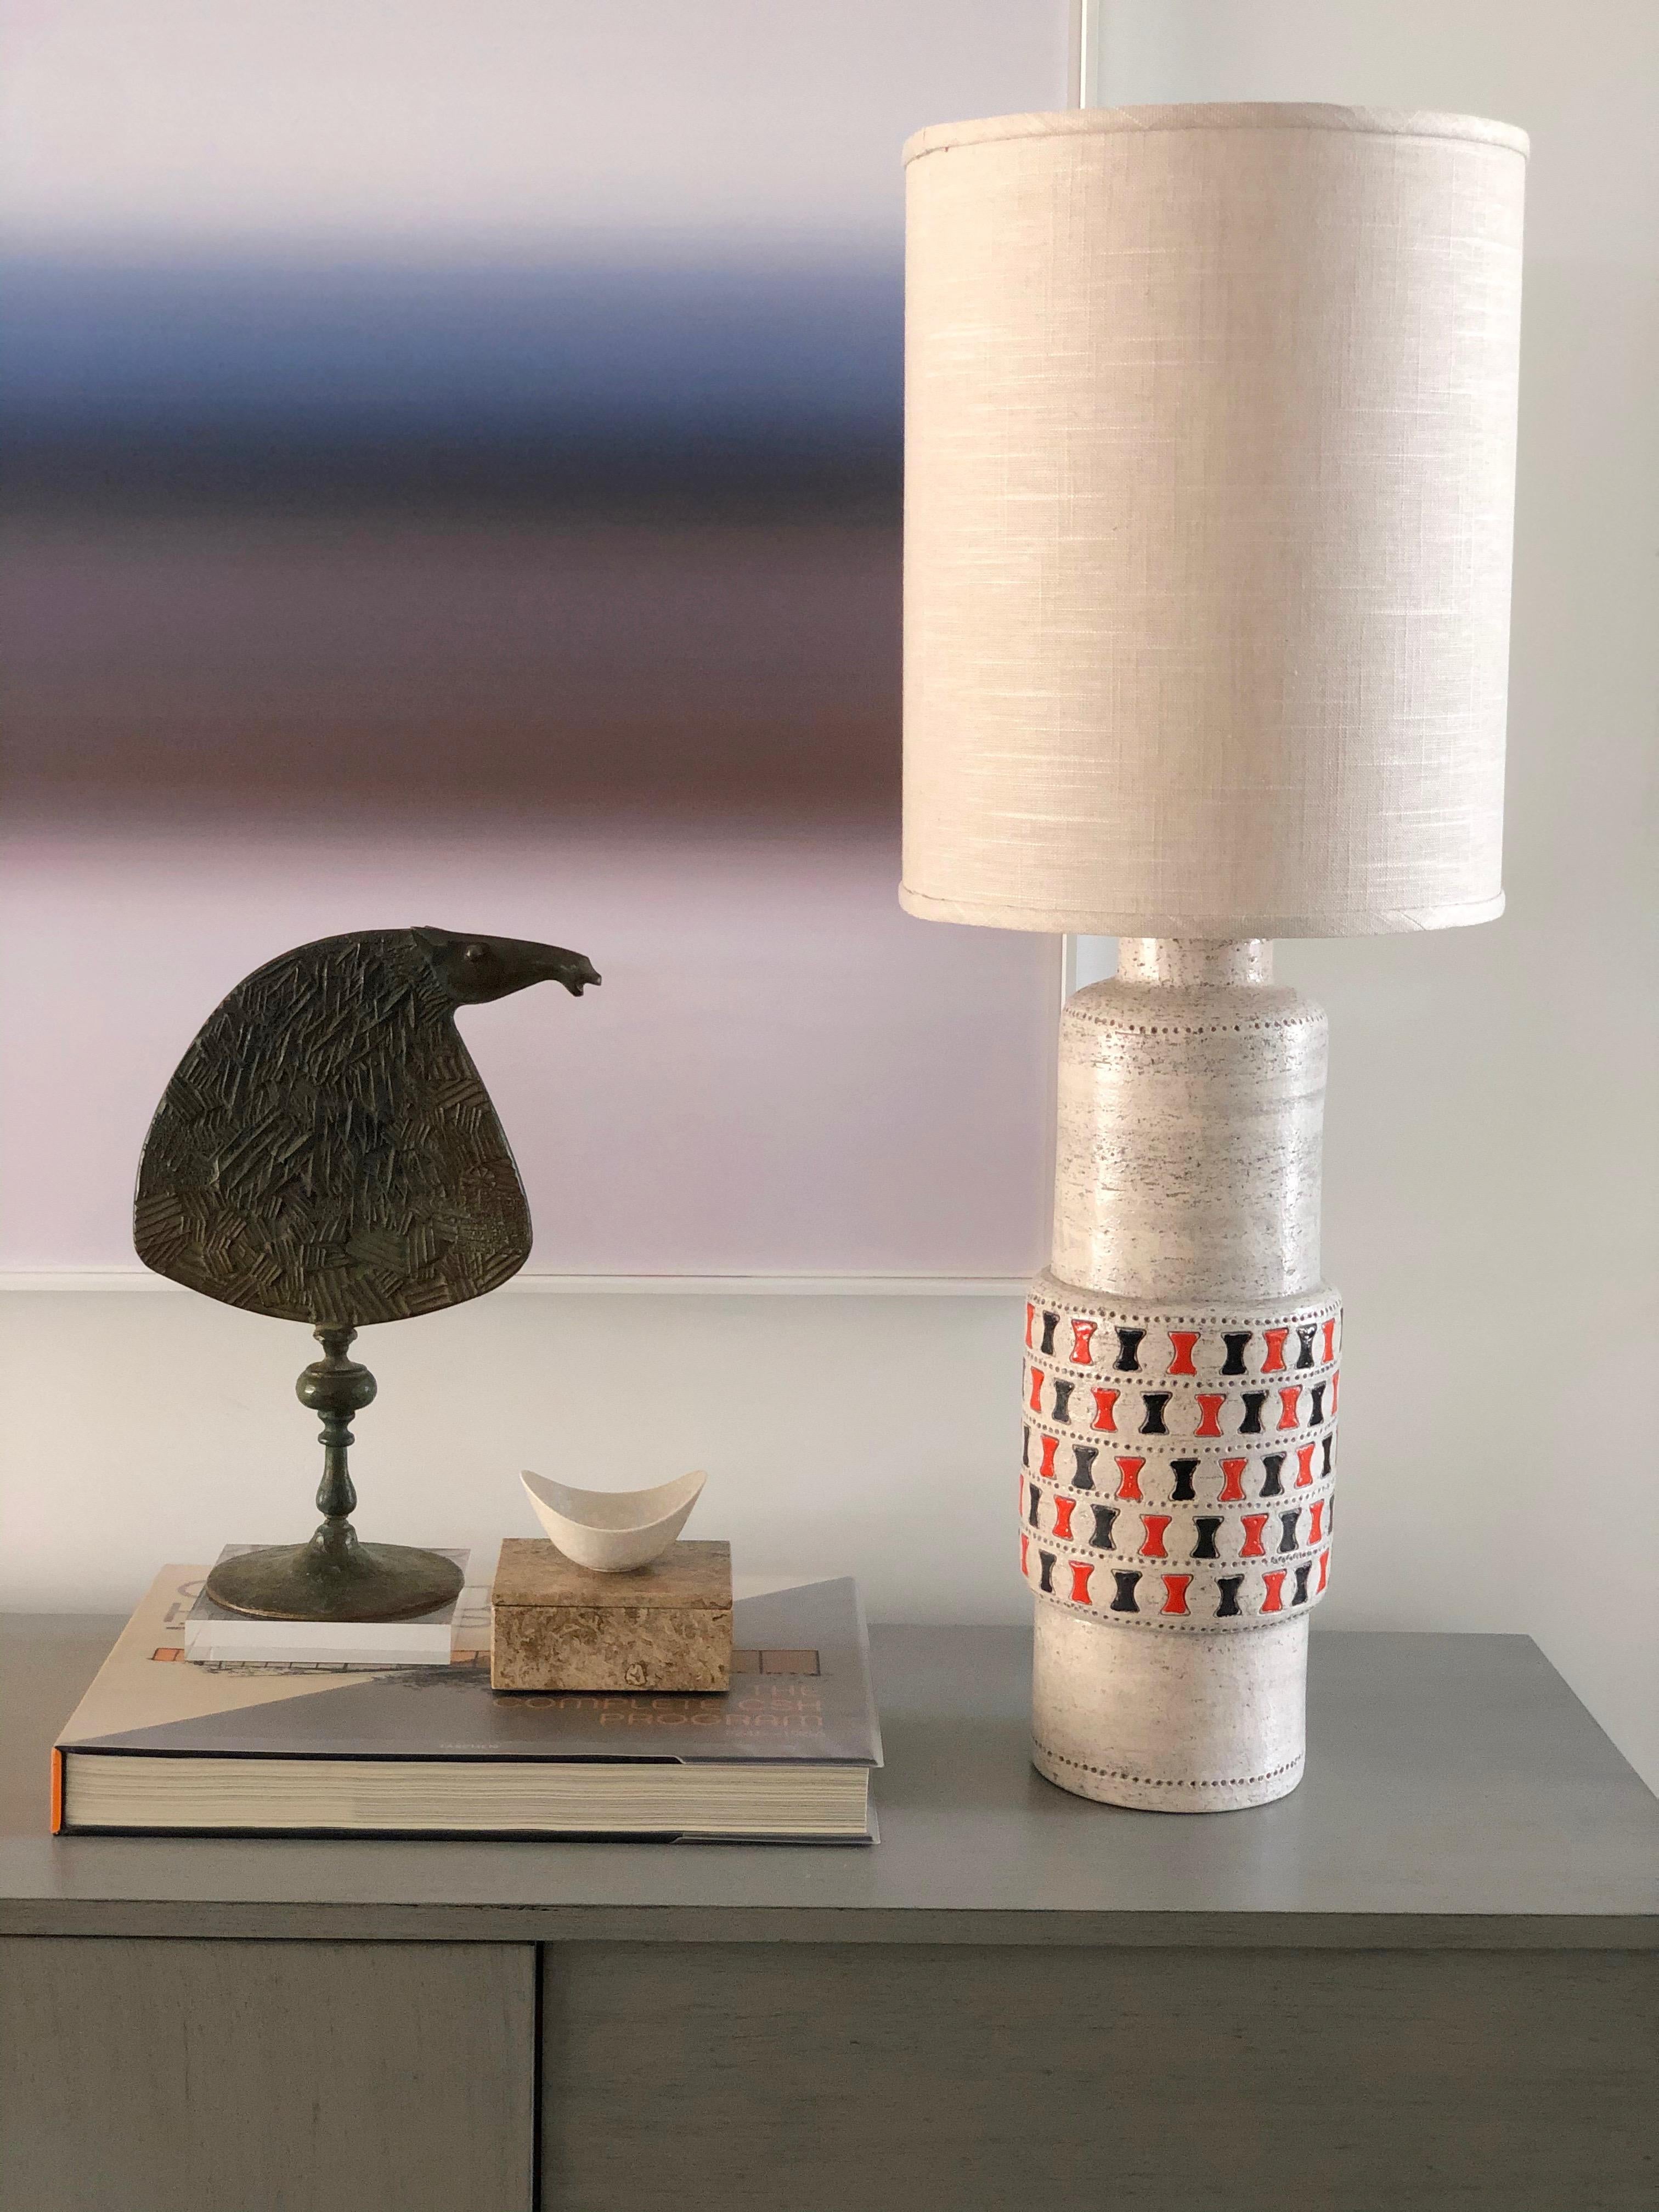 A vintage circa 1960s ceramic table lamp by Aldo Londi for Bitossi Ceramics. The lamp body is a greyish white with the 'denti' pattern in orange and black. The lamp has a new shade and is wired for use in the US. The shade measures 15